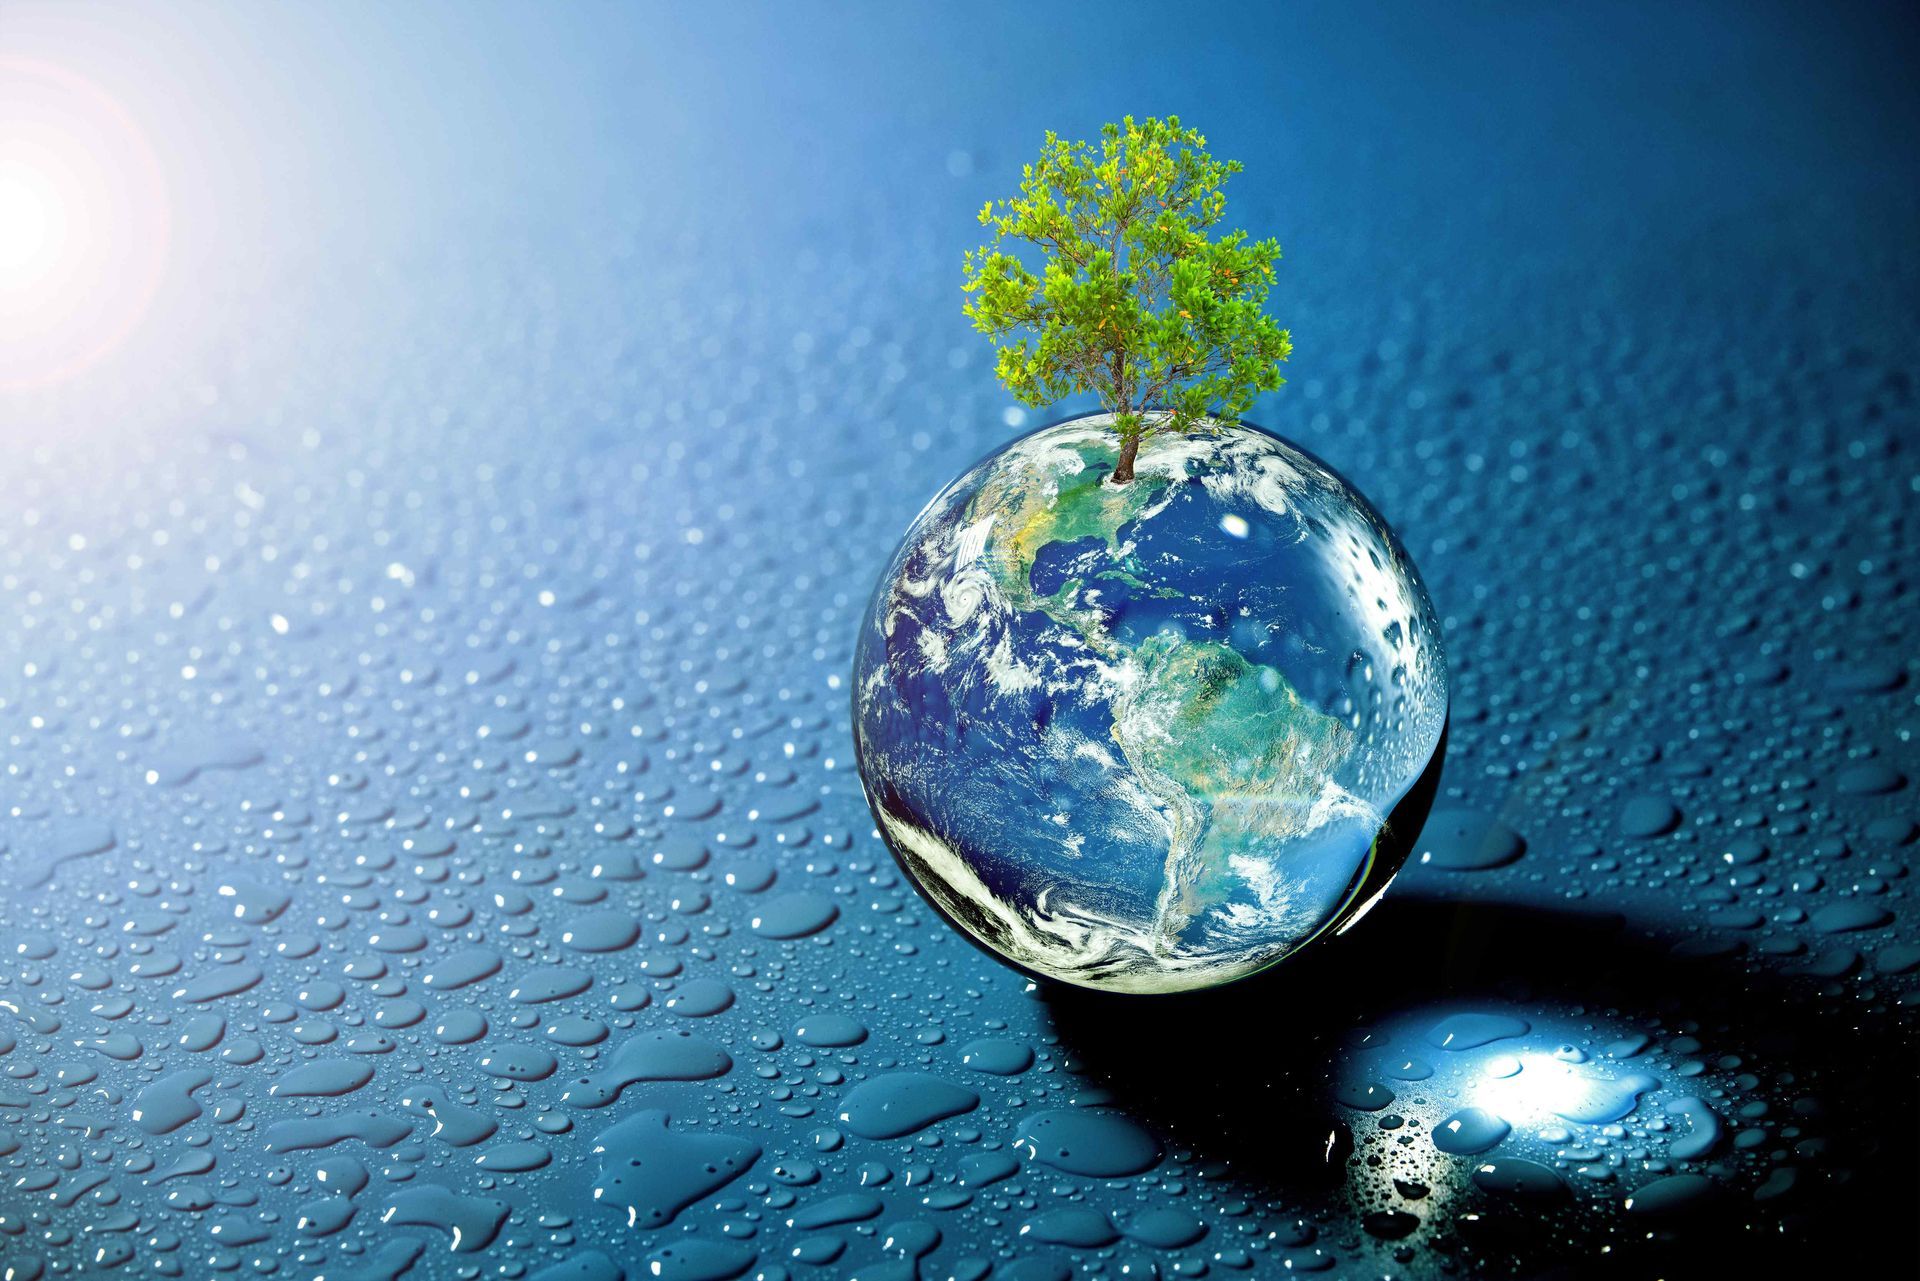 A water droplet resembling the earth sprouts a single, green tree.